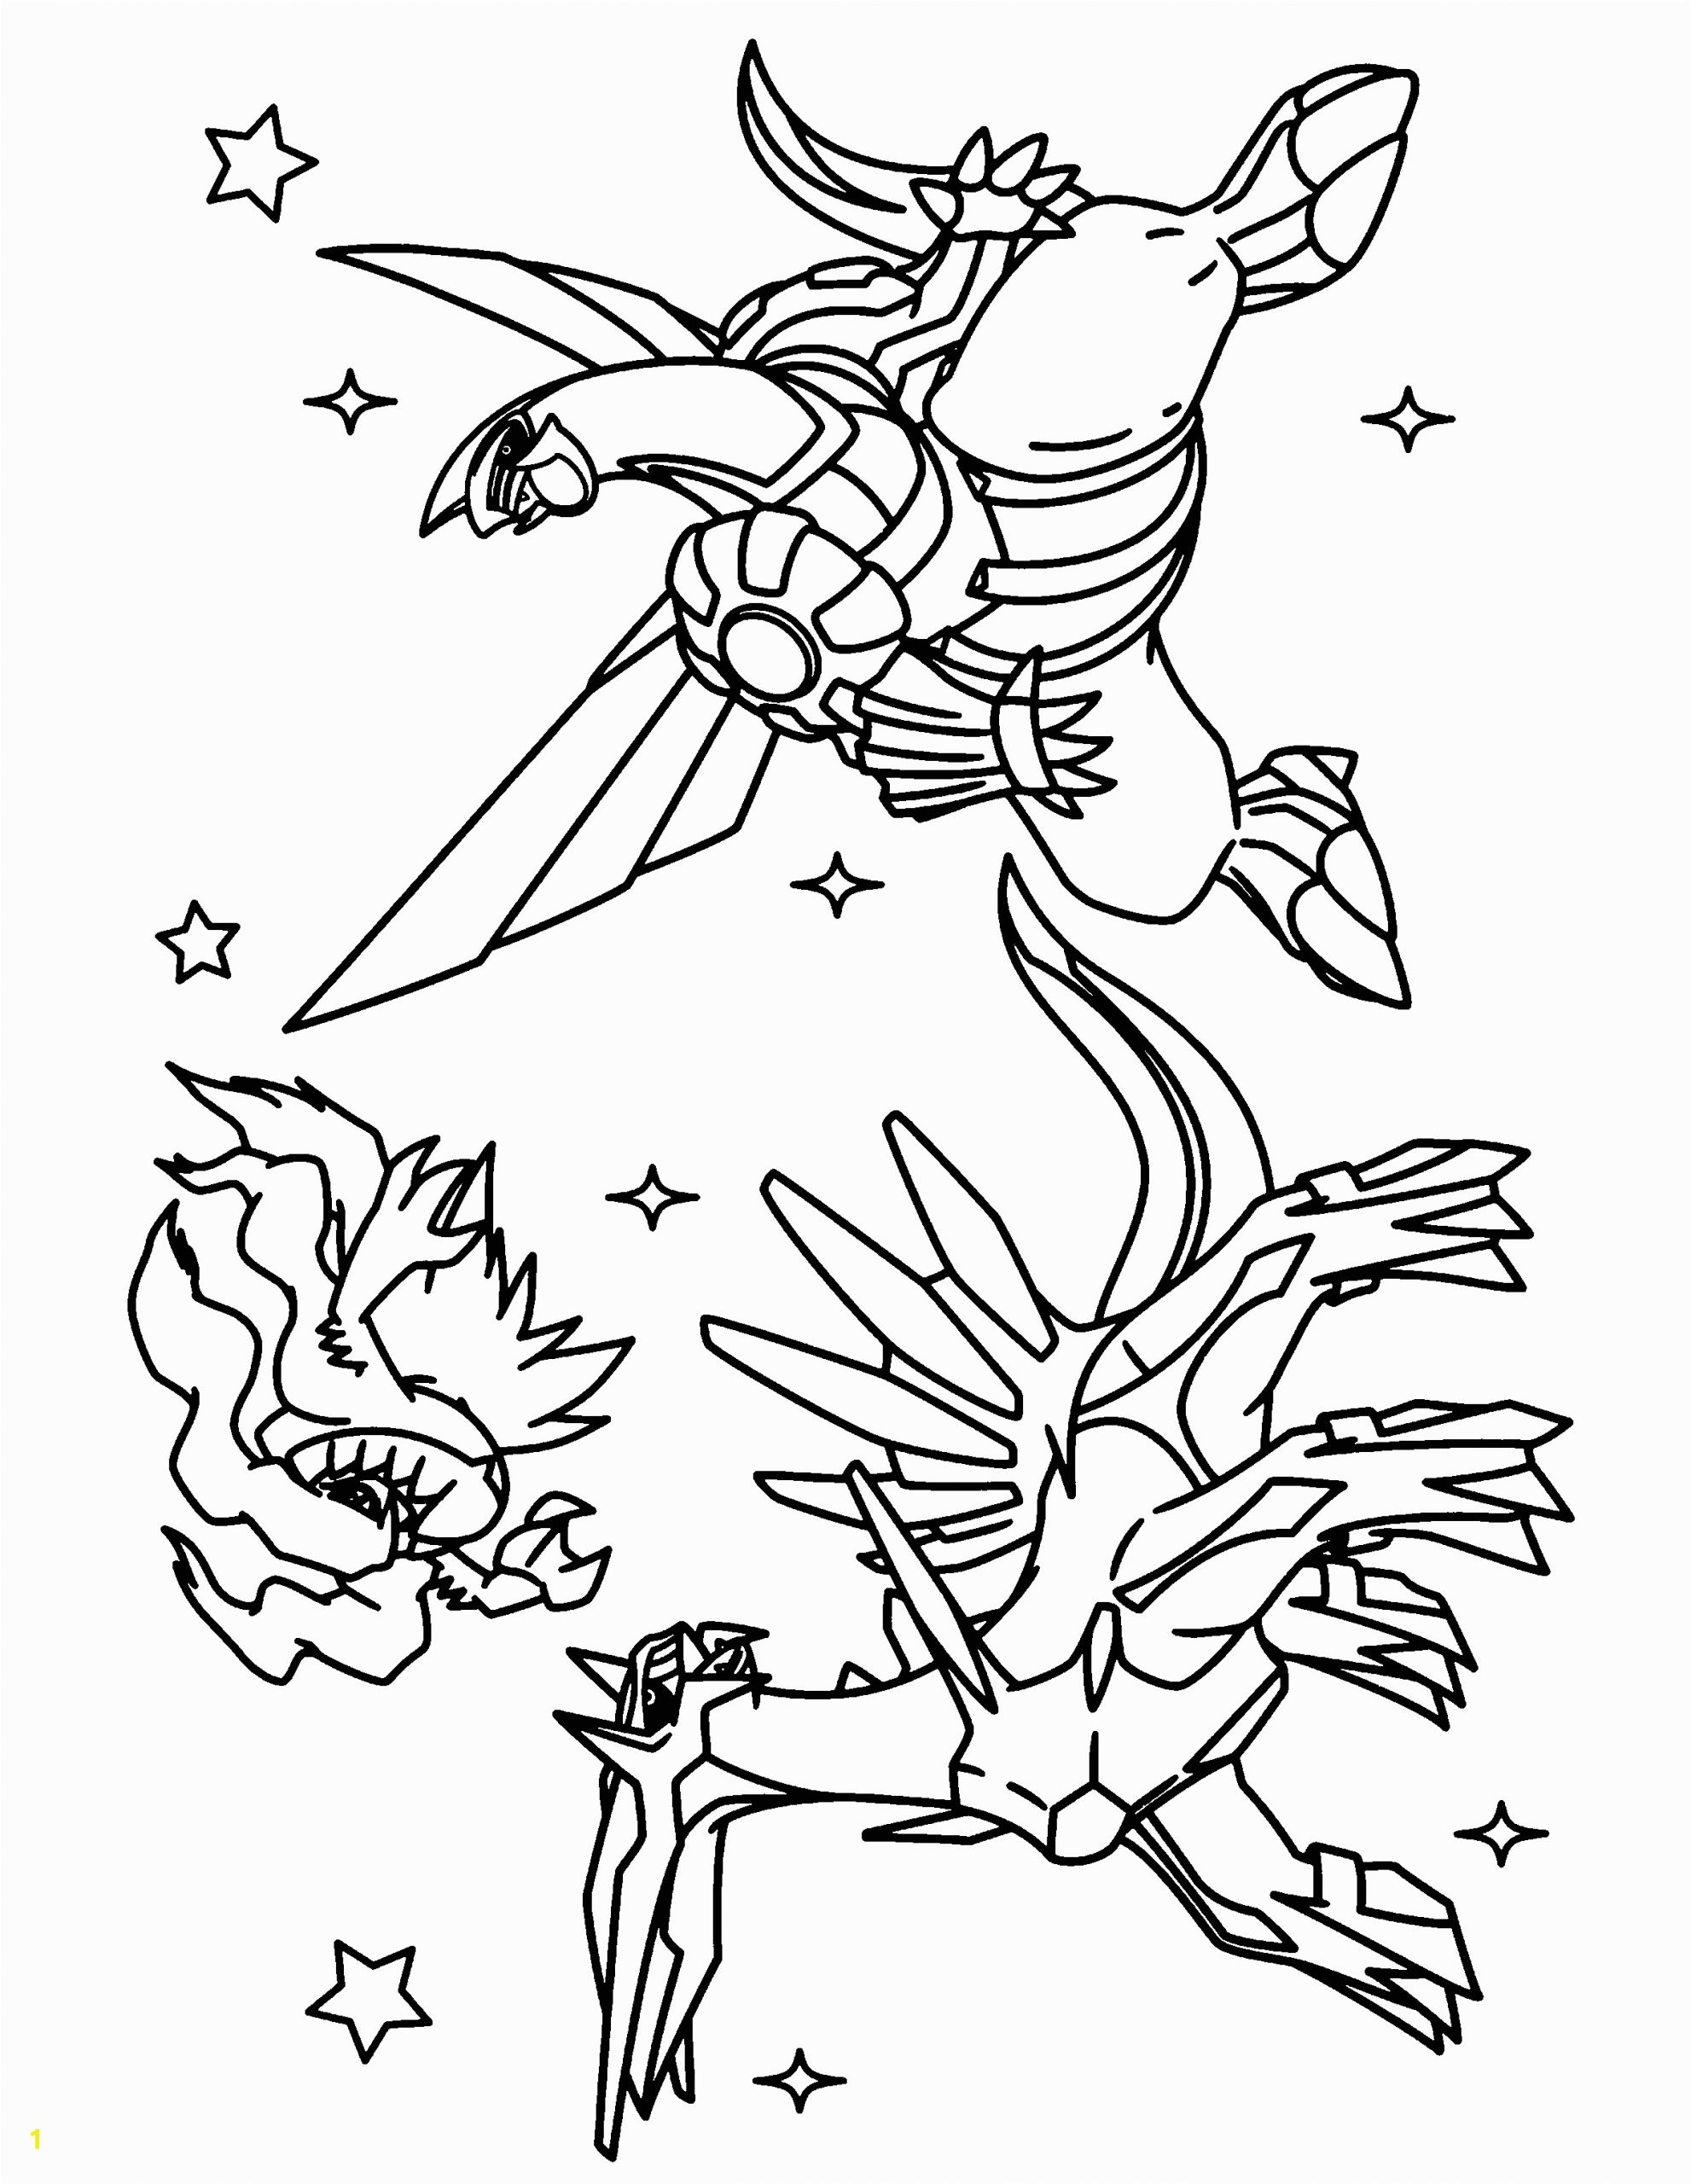 Pokemon Dialga and Palkia Coloring Pages Gallade Coloring Pages at Getcolorings